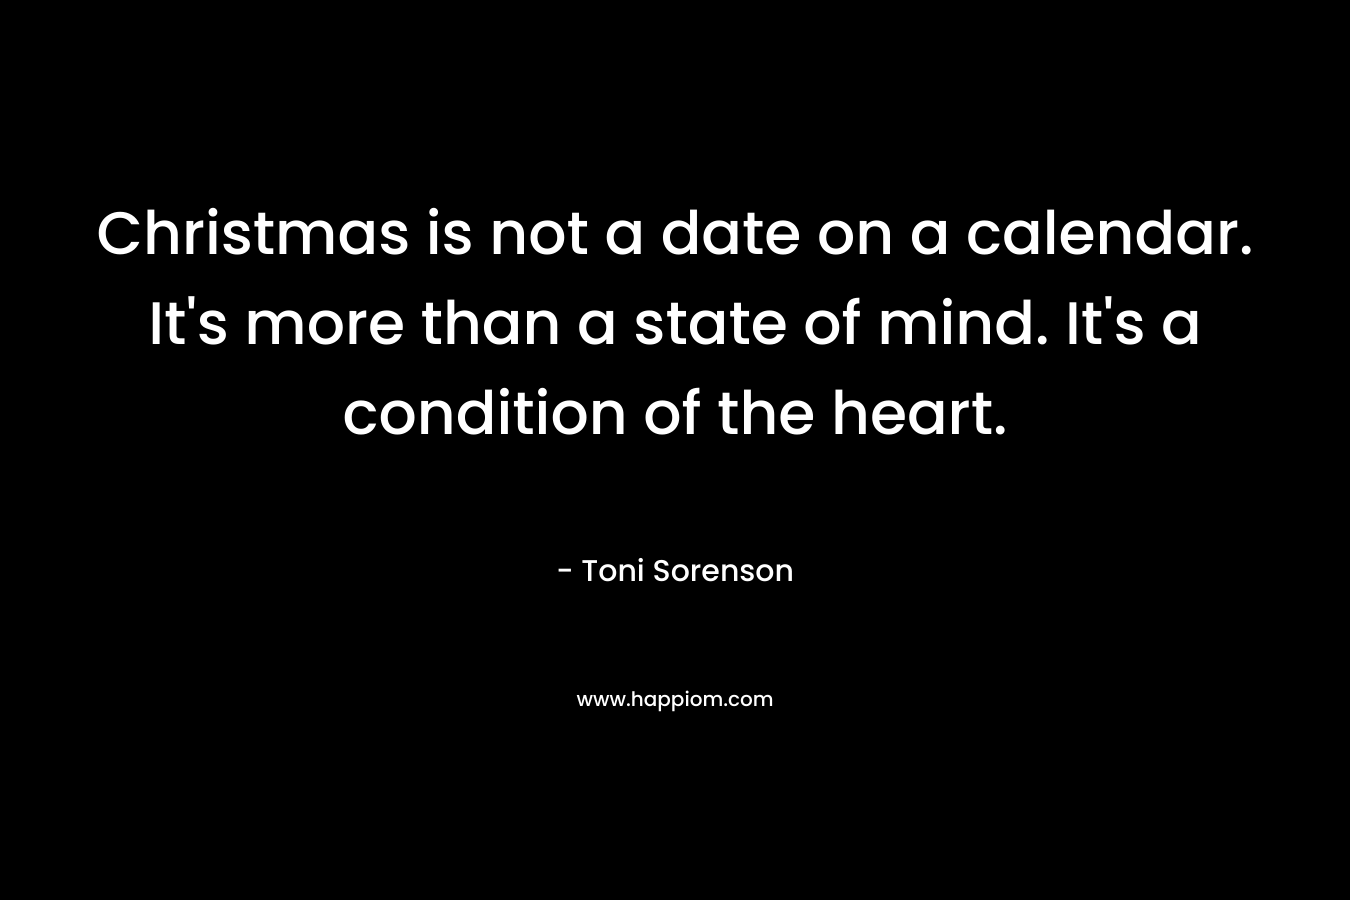 Christmas is not a date on a calendar. It’s more than a state of mind. It’s a condition of the heart. – Toni Sorenson